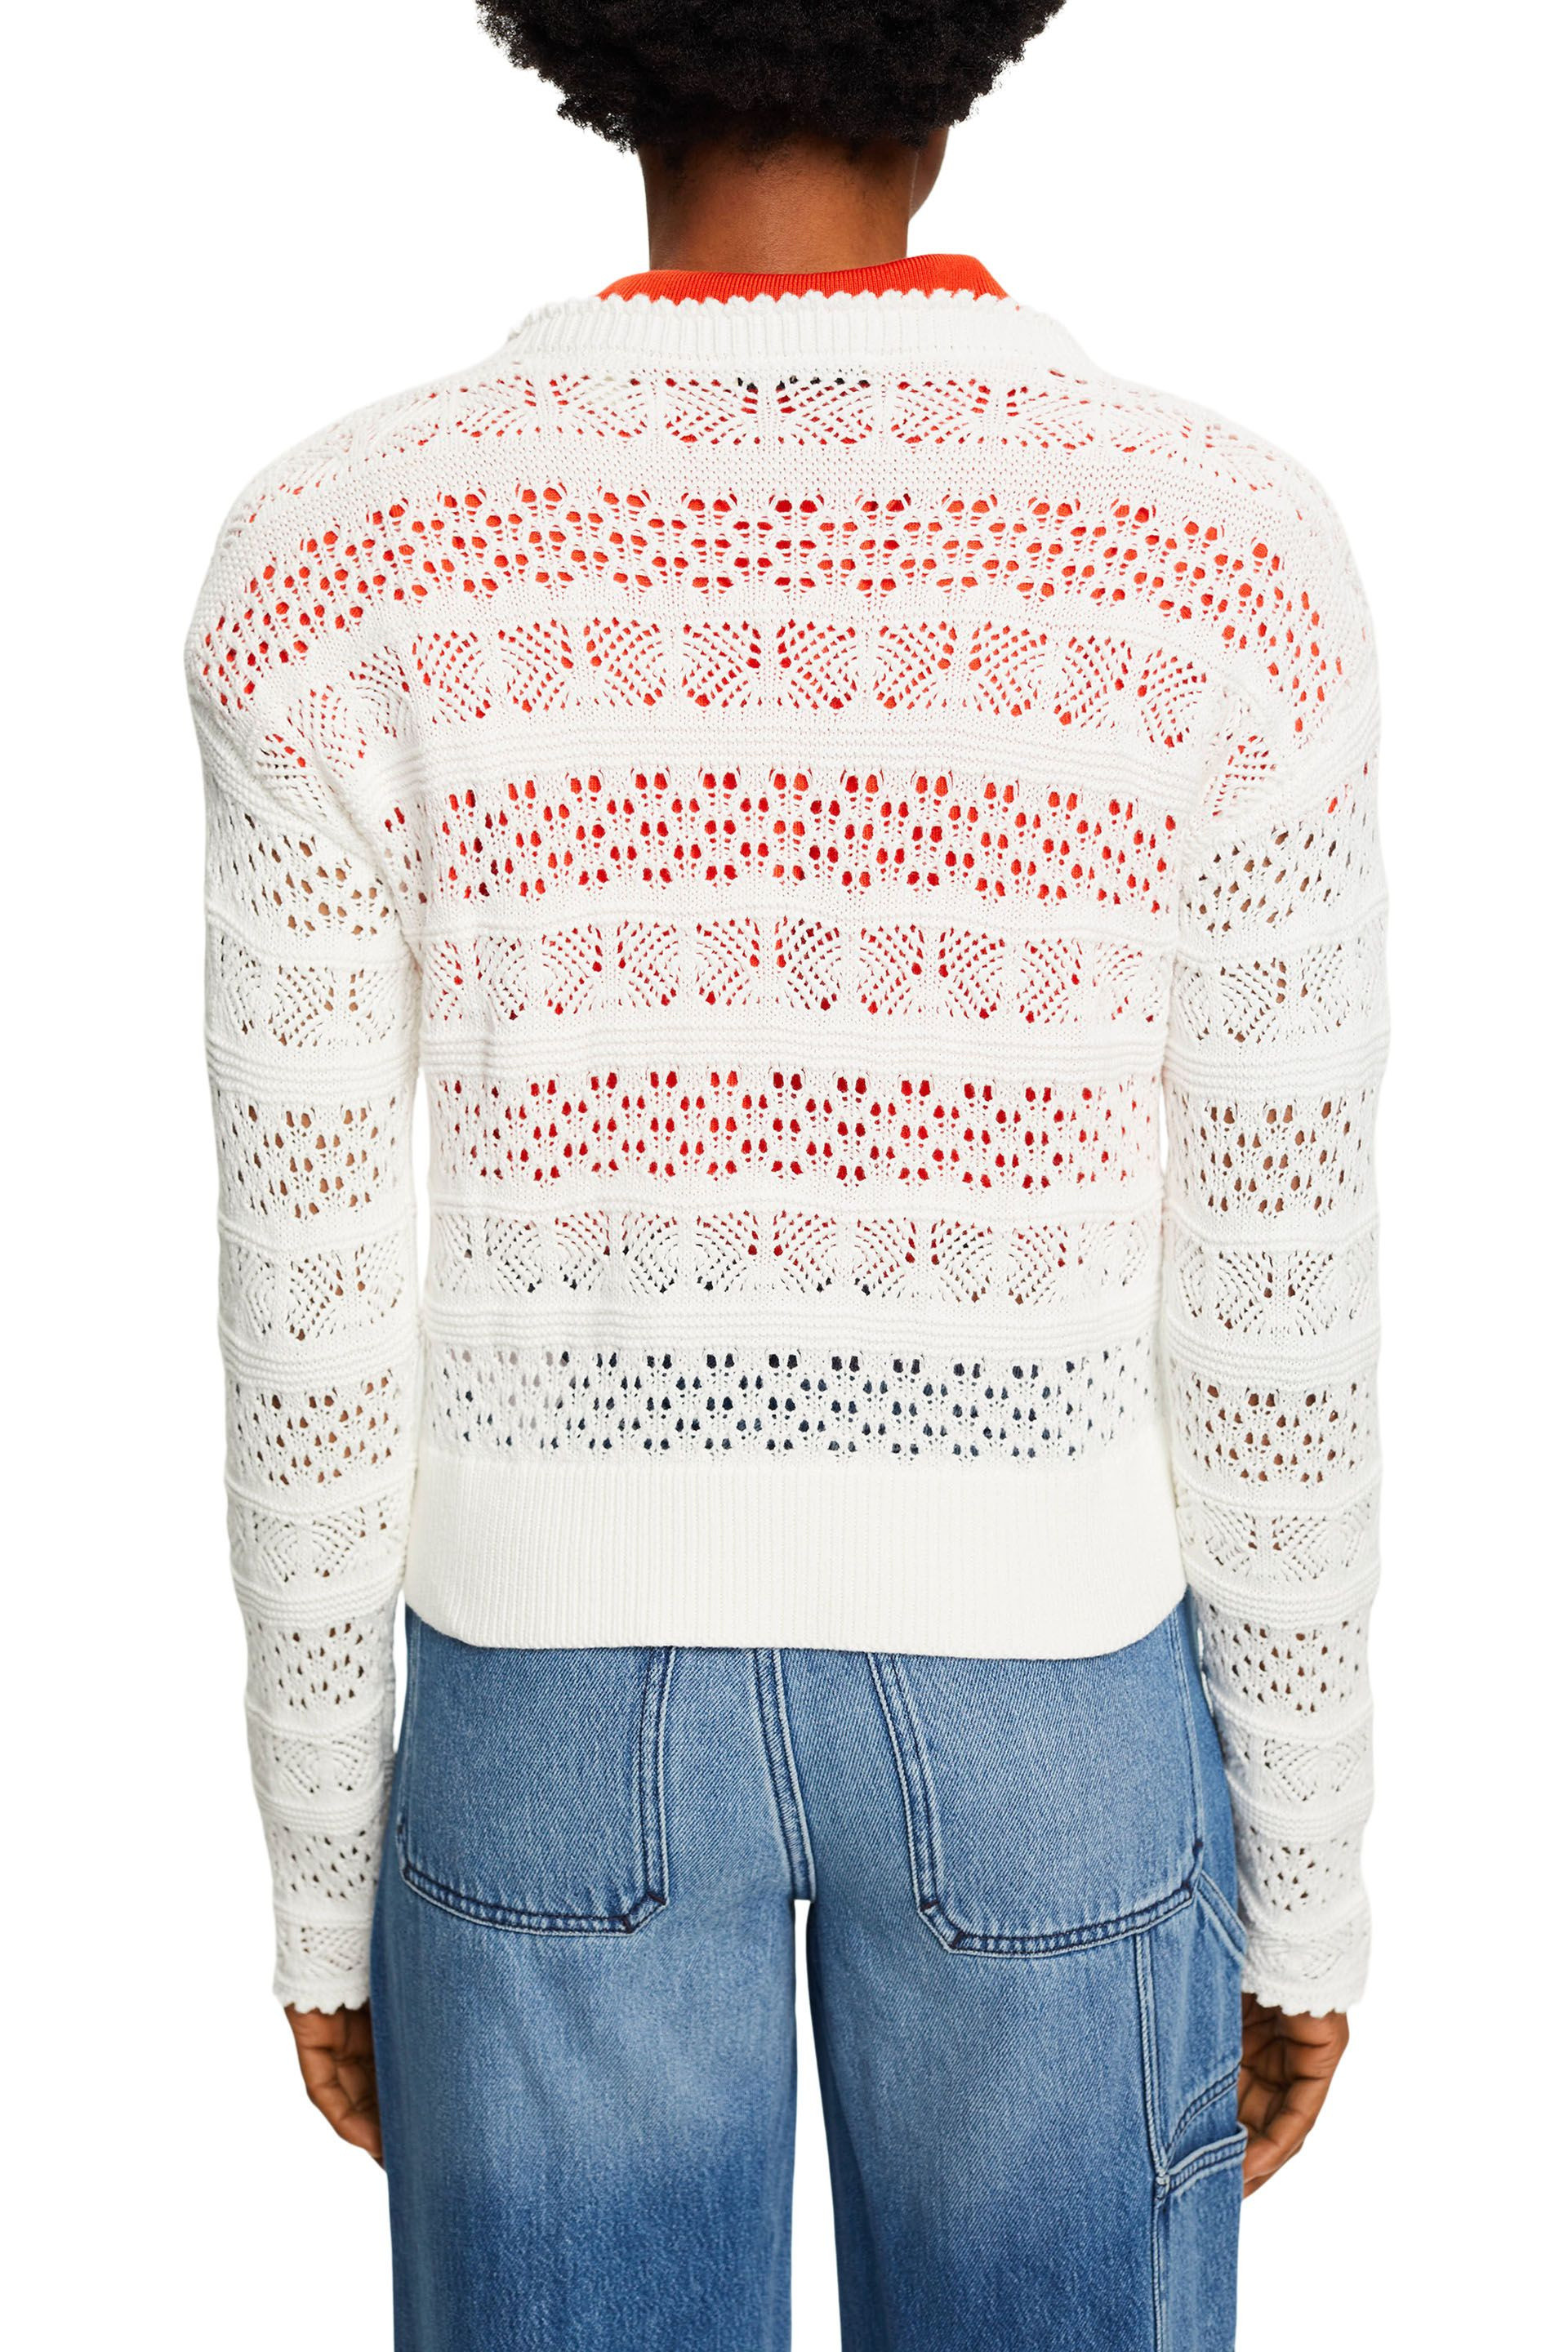 Esprit - Knitted pullover in cotton, White, large image number 3